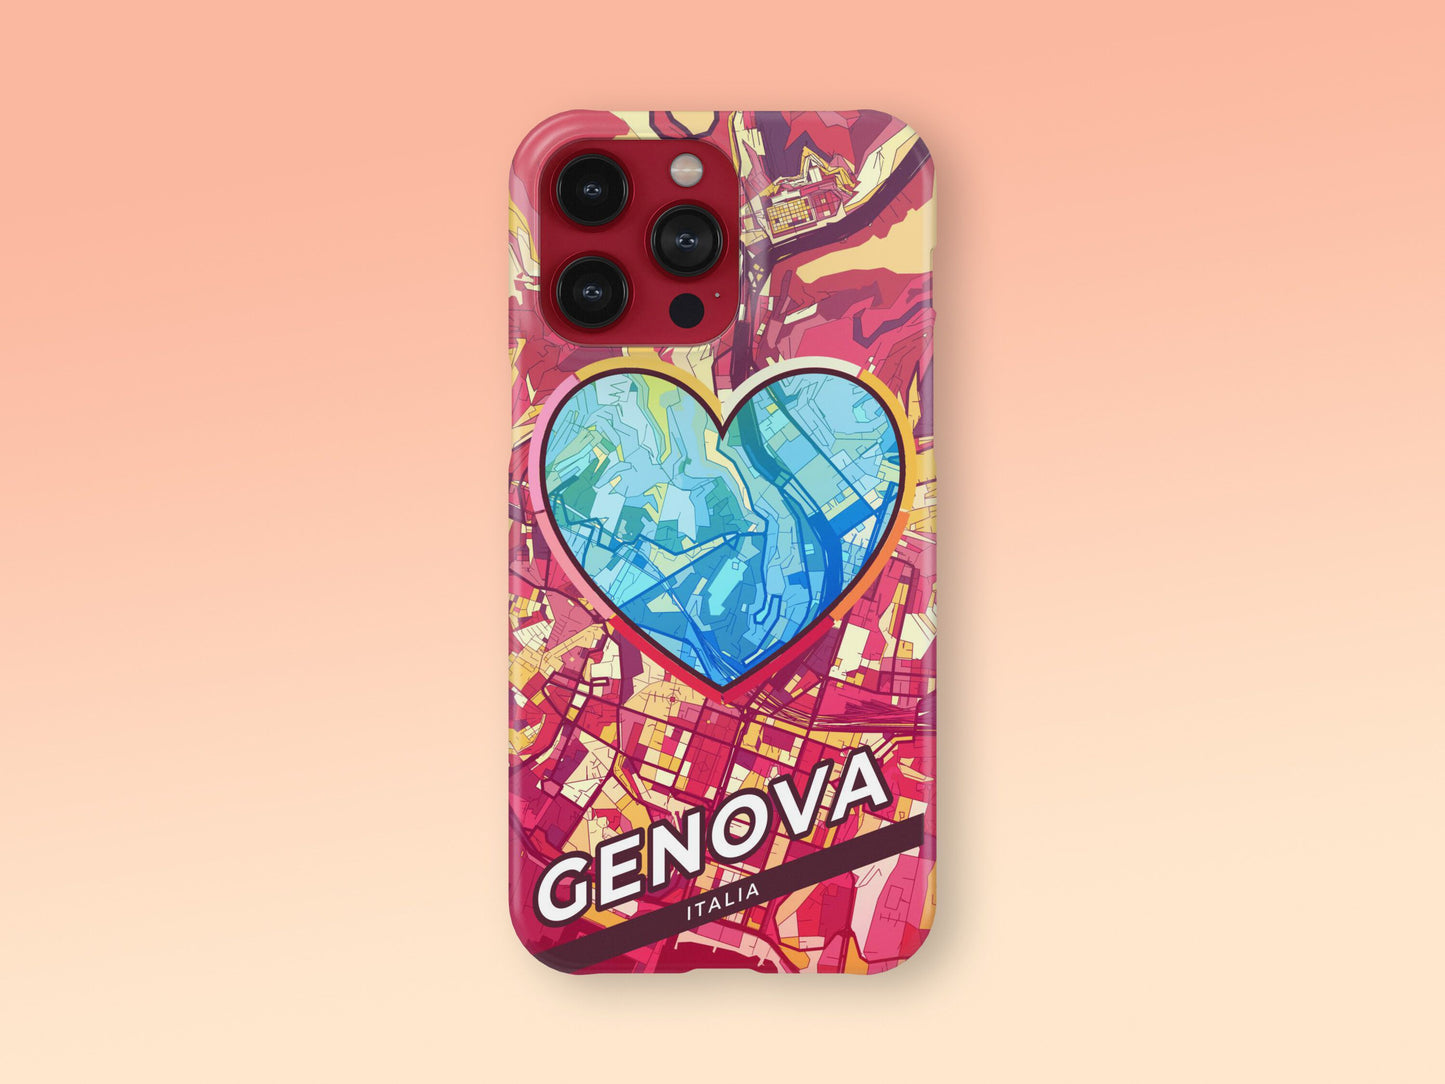 Genoa Italy slim phone case with colorful icon. Birthday, wedding or housewarming gift. Couple match cases. 2